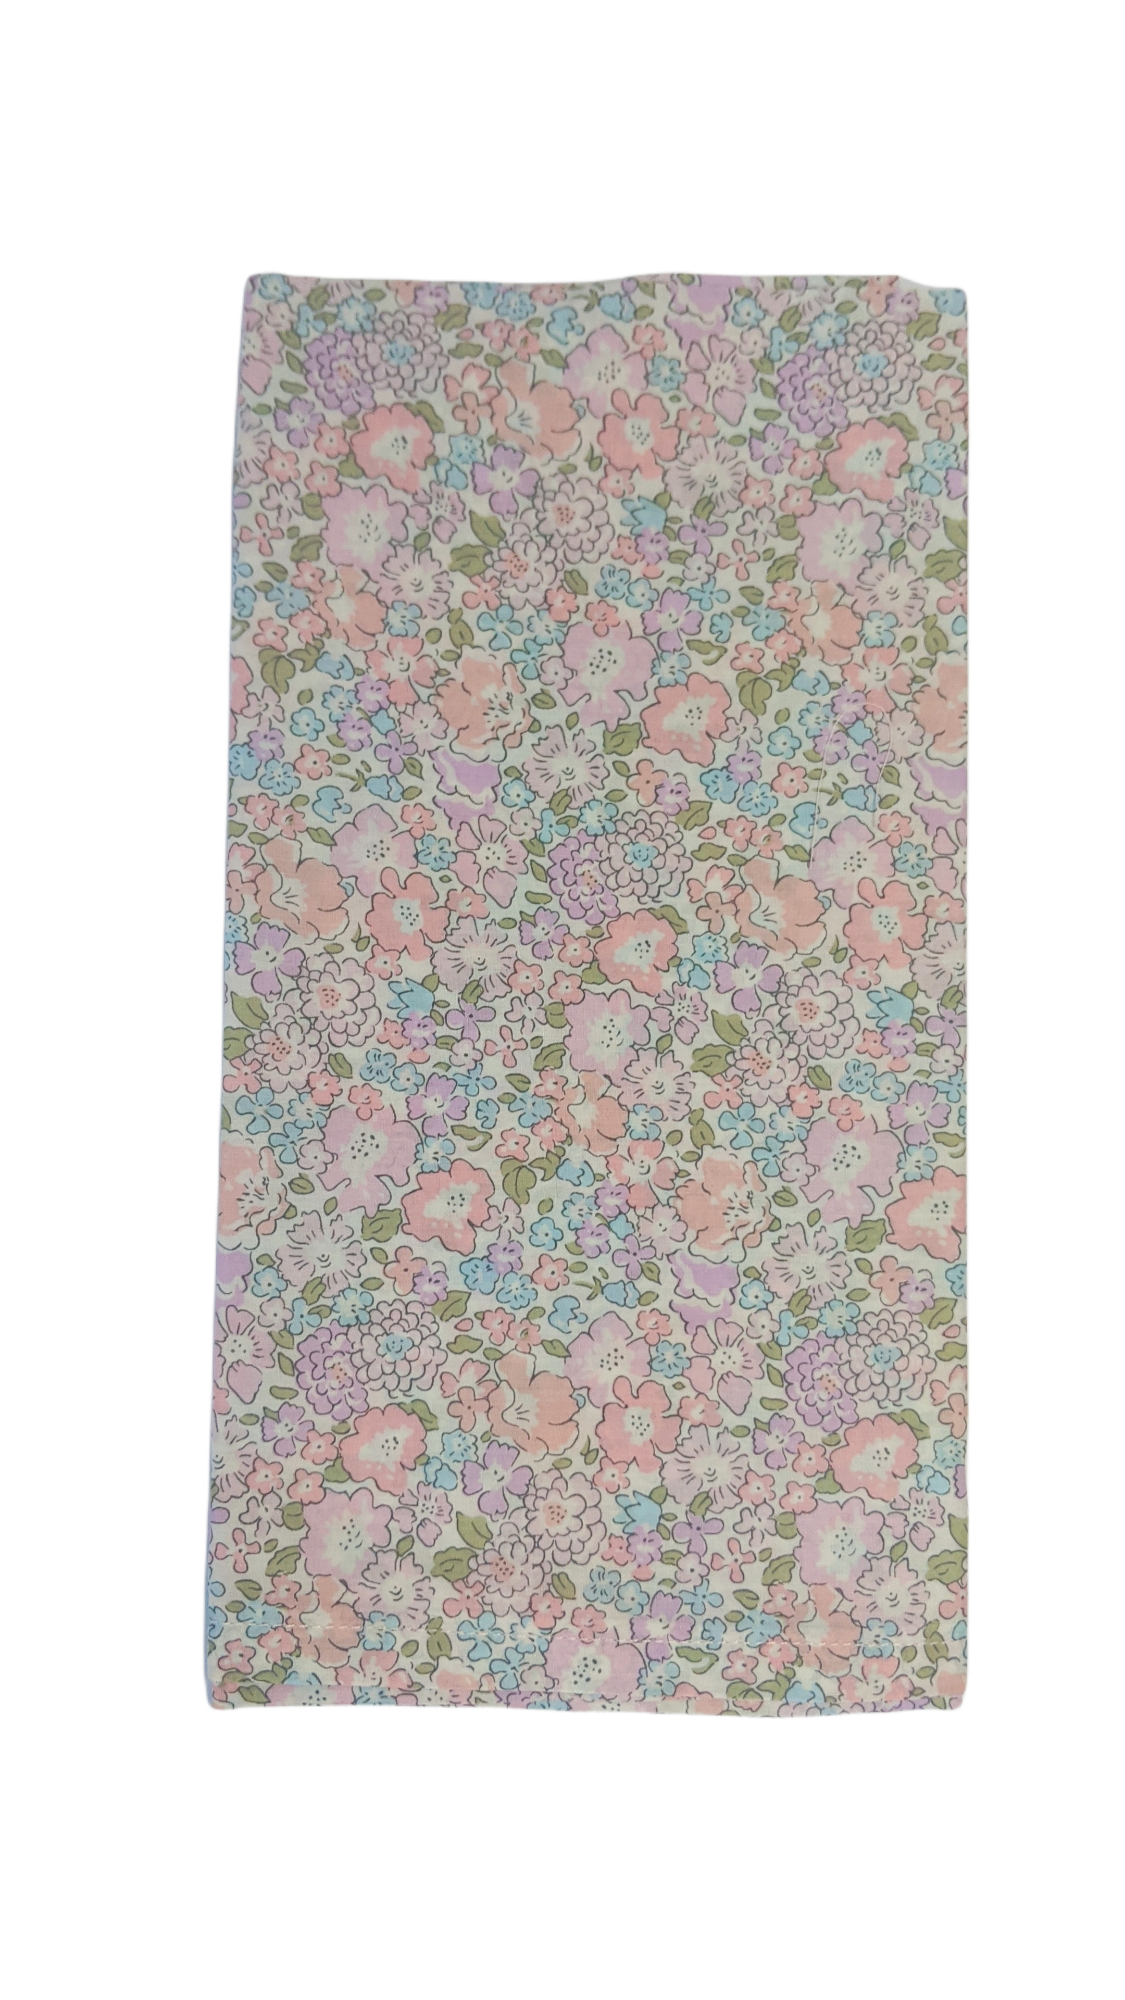 Set of 2 Napkins - Liberty Tana Lawn Pink Michelle Floral Fabric